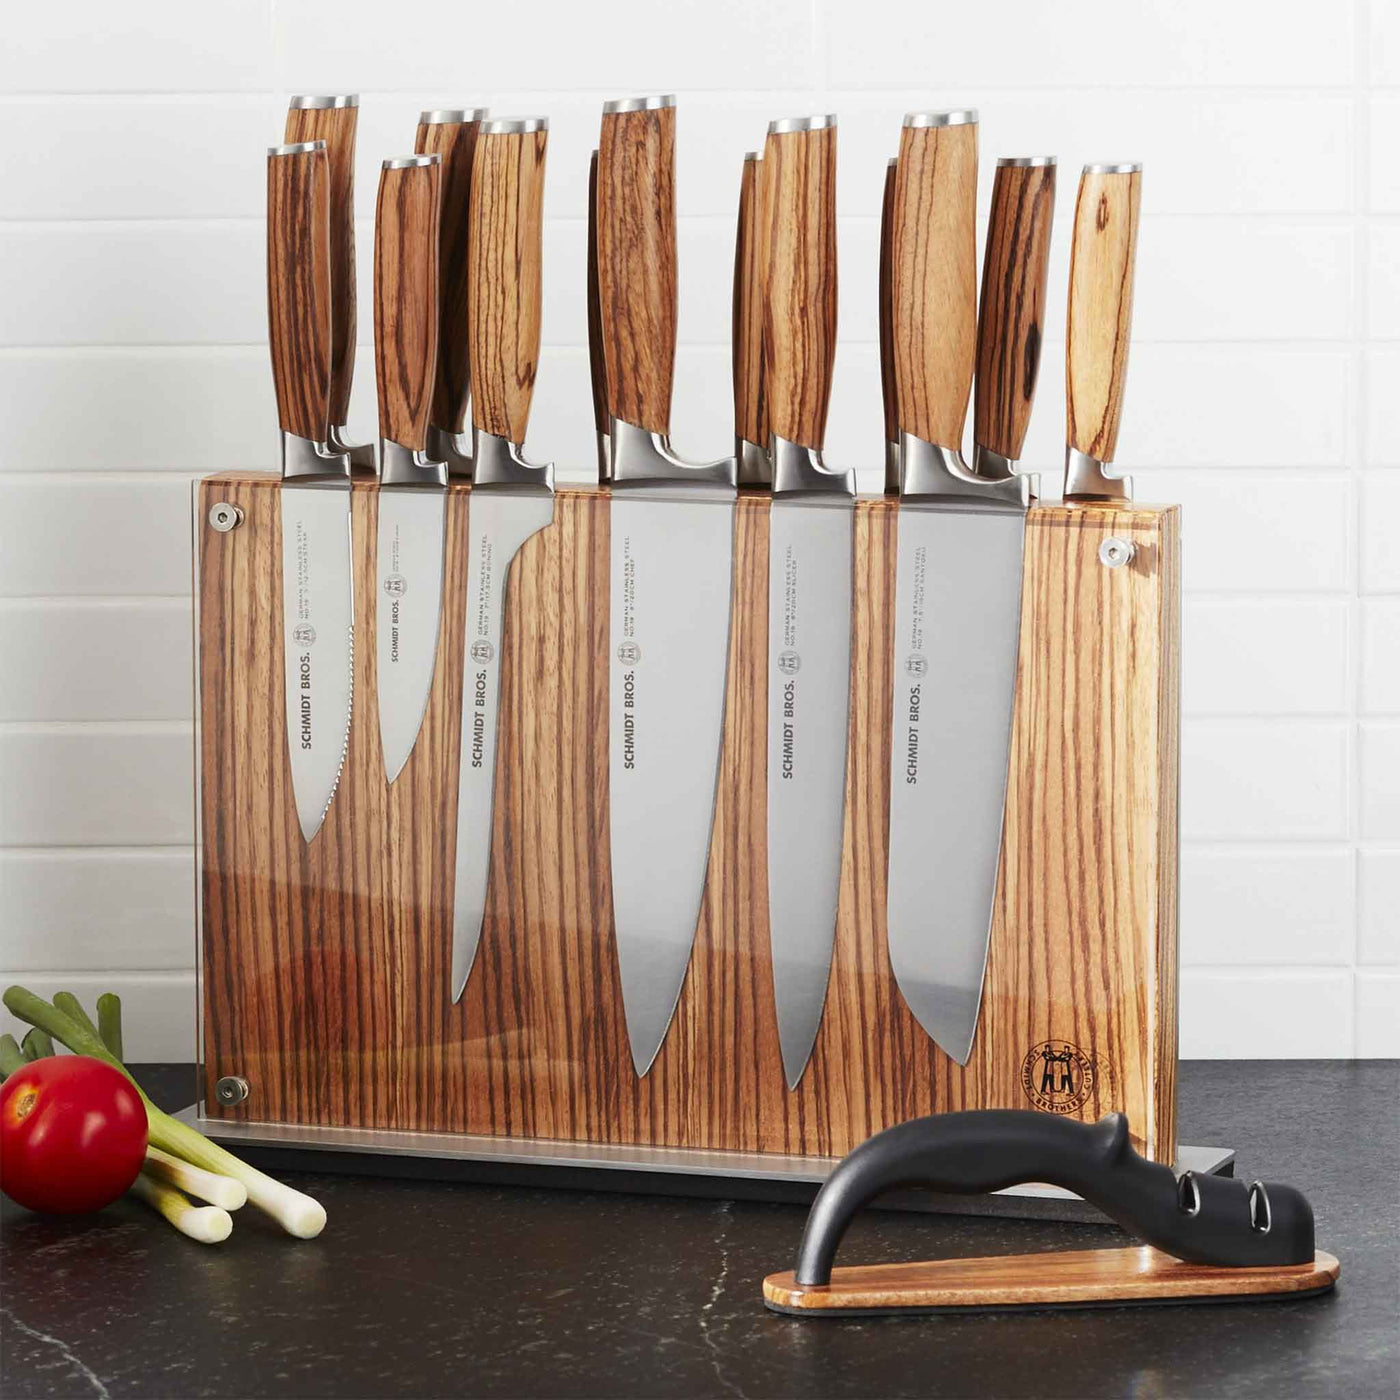 https://schmidtbrothers.com/cdn/shop/products/schmidt-brothers-kitchen-cutlery-schmidt-brothers-zebra-wood-15-piece-knife-set-high-carbon-stainless-steel-cutlery-with-zebra-wood-magnetic-knife-block-and-knife-sharpener-2829061783_1400x.jpg?v=1683912303